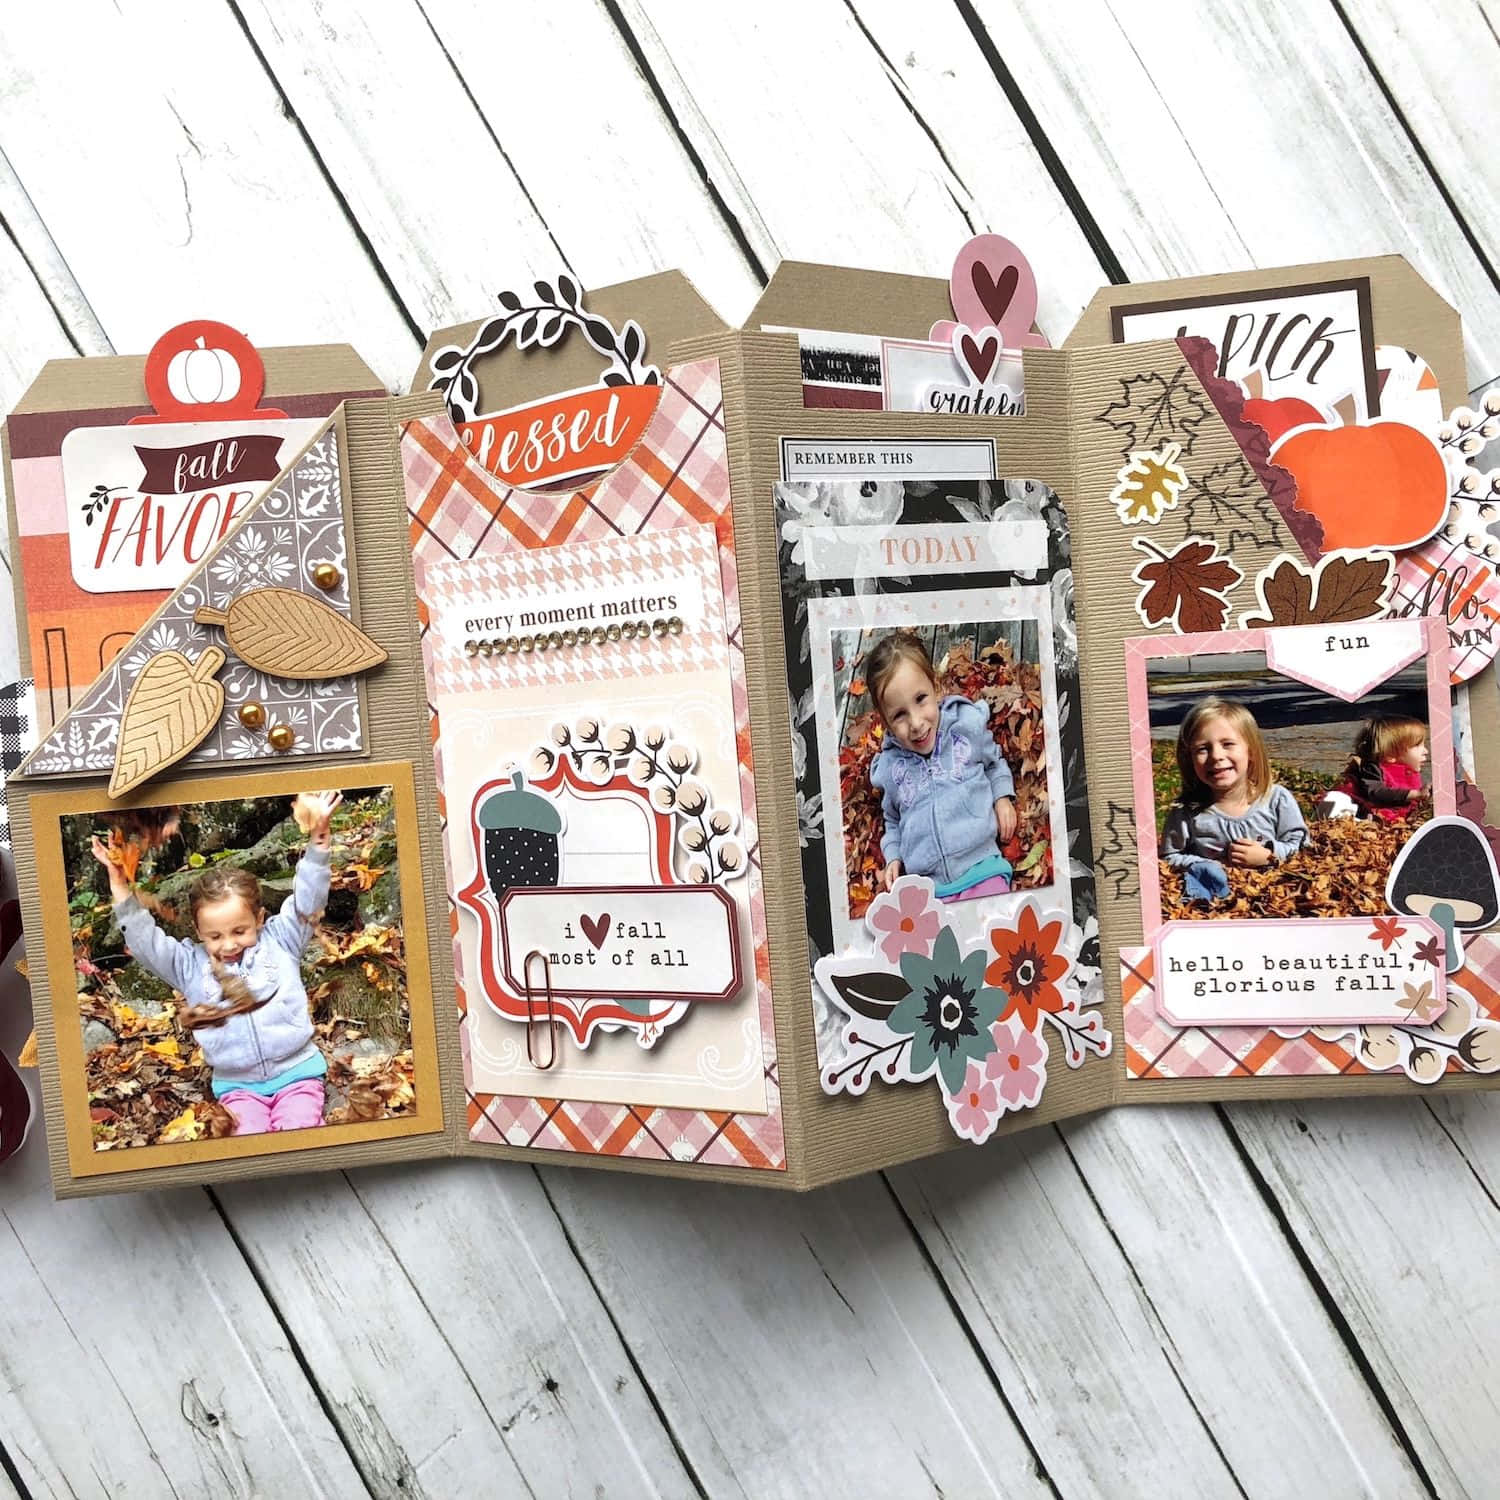 Get creative with scrapbooking today